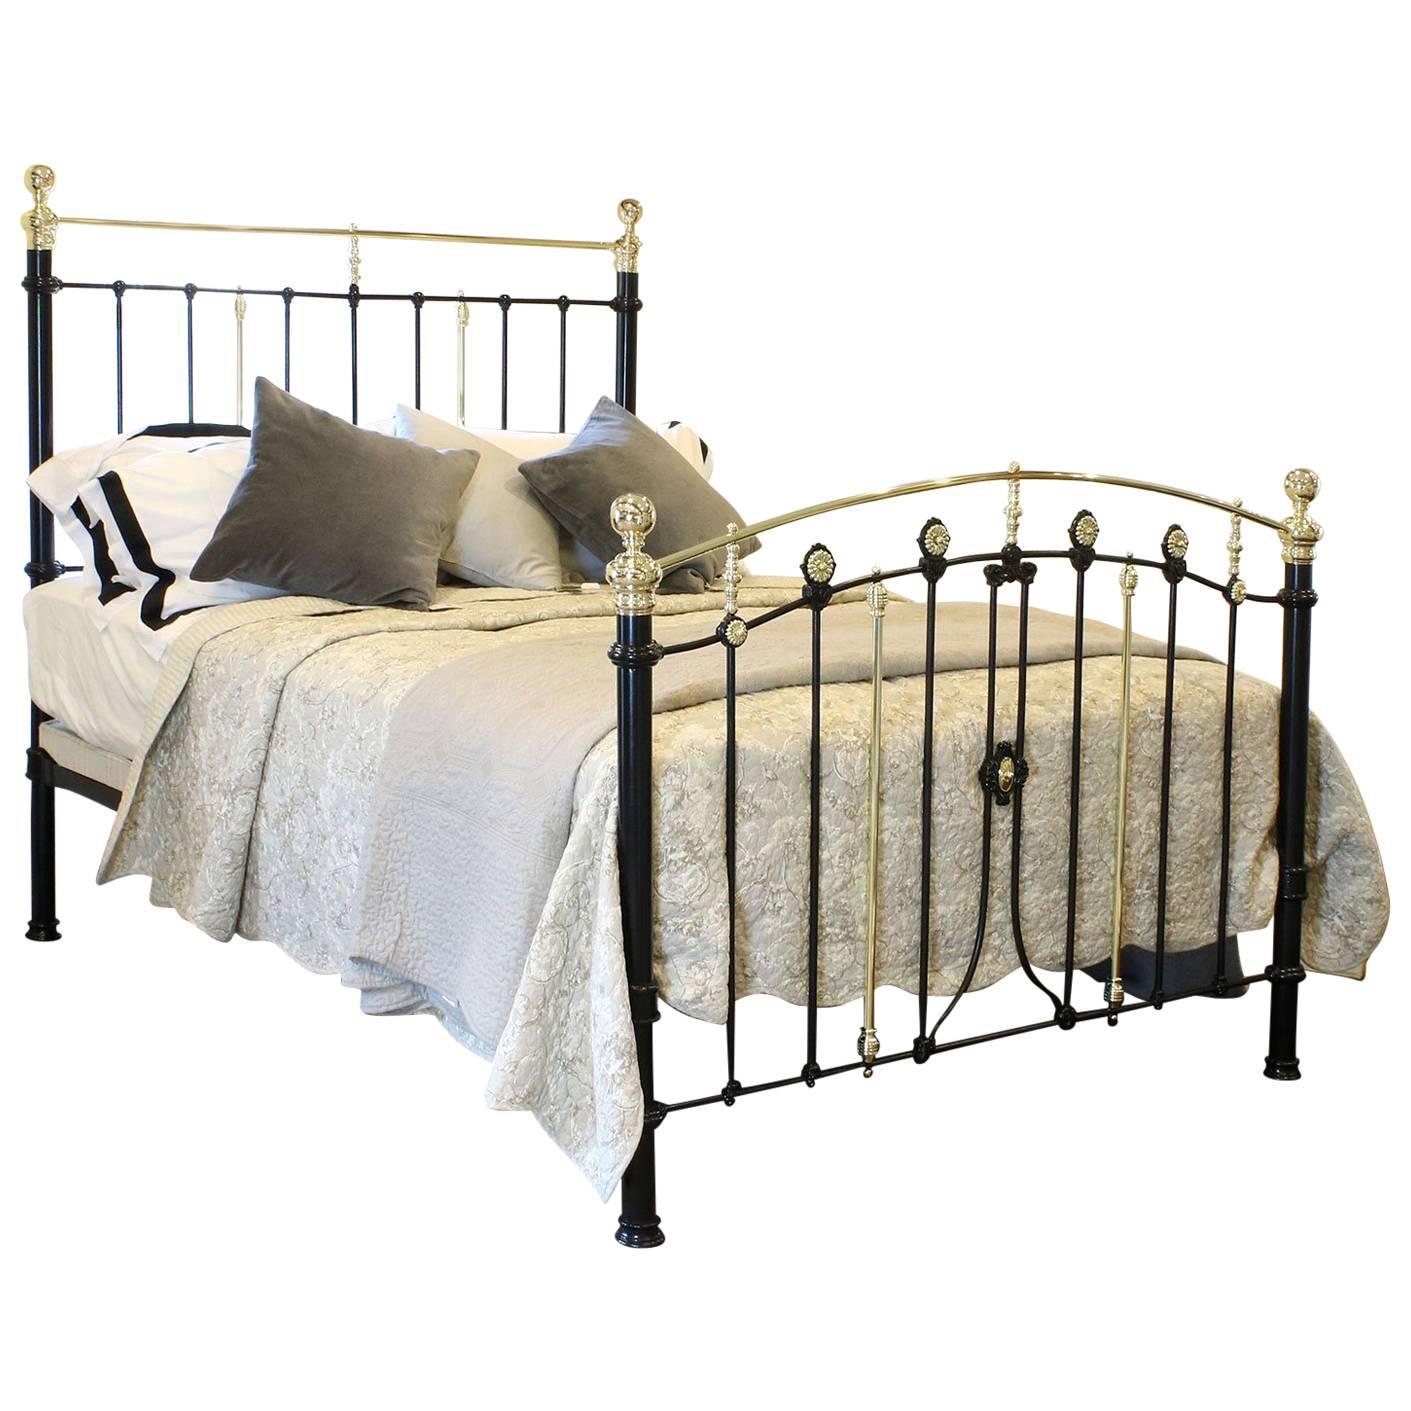 Decorative Black Brass and Iron Bed, MK130